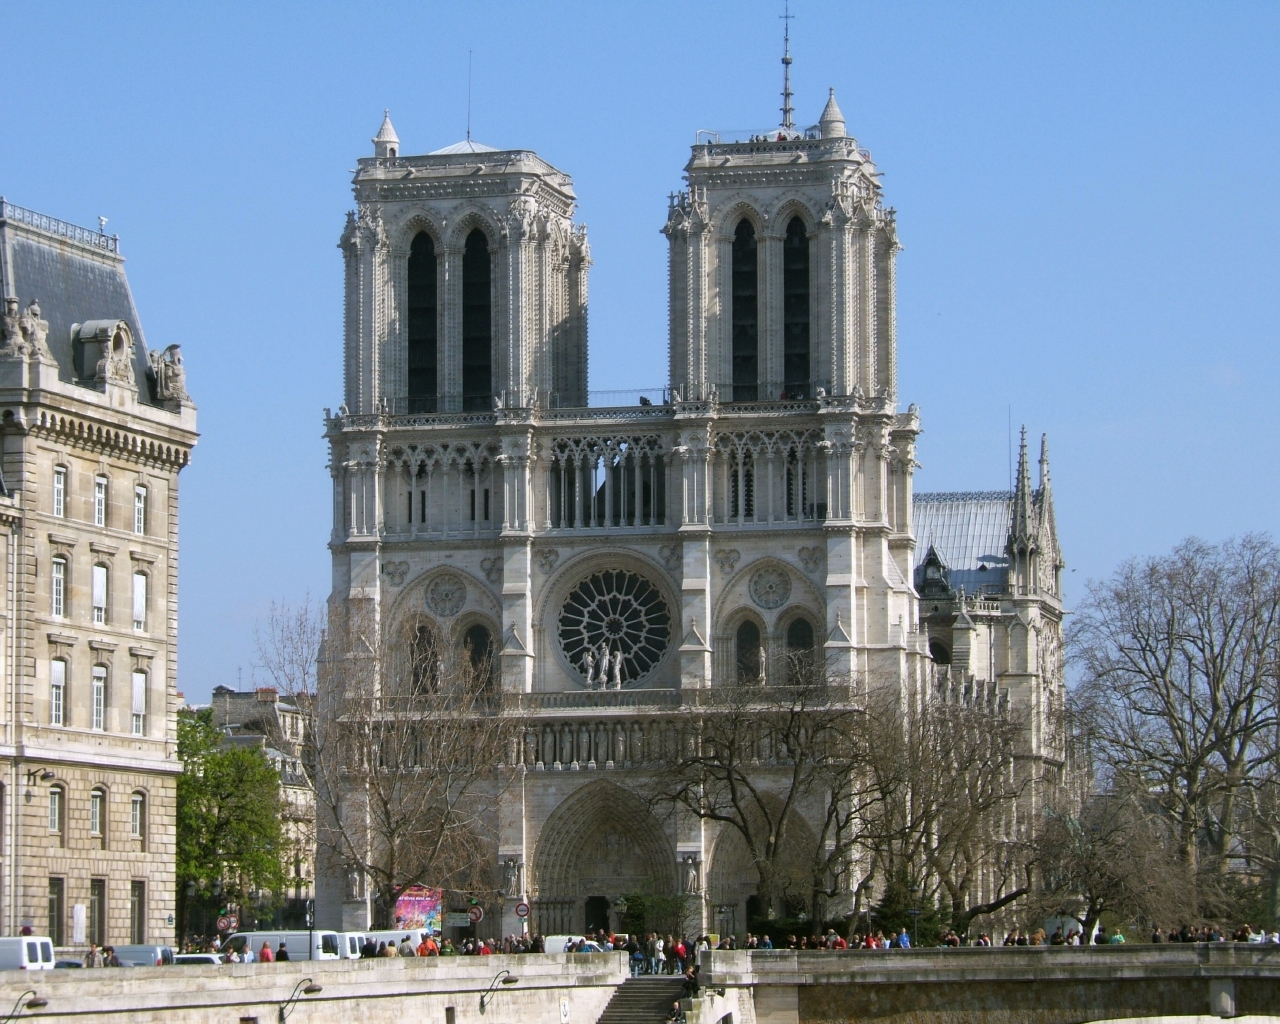 Notre Dame Cathedral in Paris image - Free stock photo - Public Domain - CC0 Images